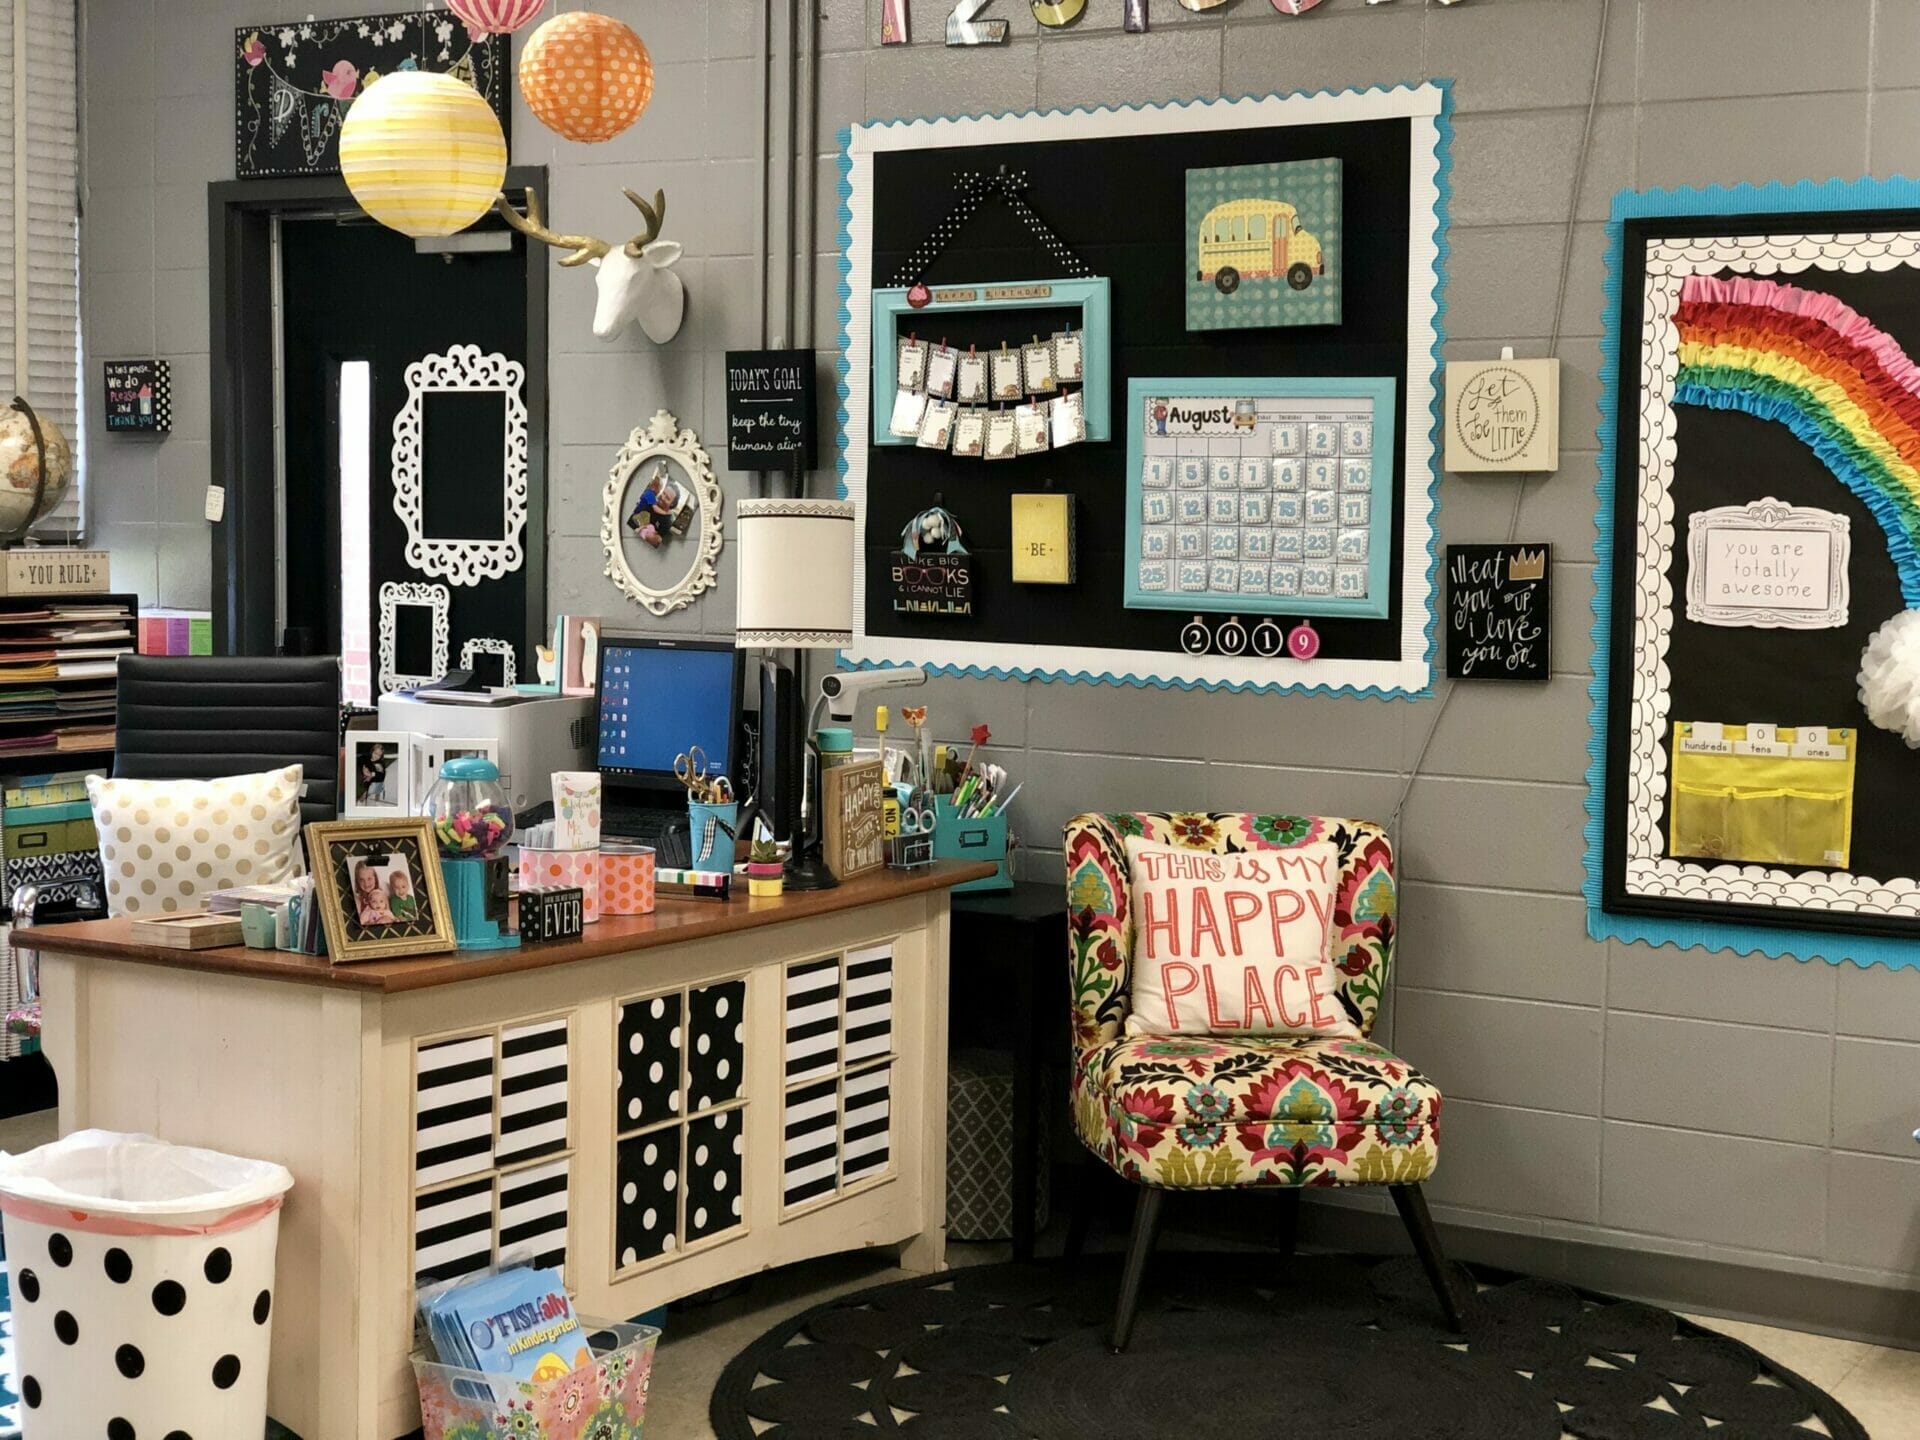 Classroom Reveal 2019-2020 : Blue Skies with Jennifer White